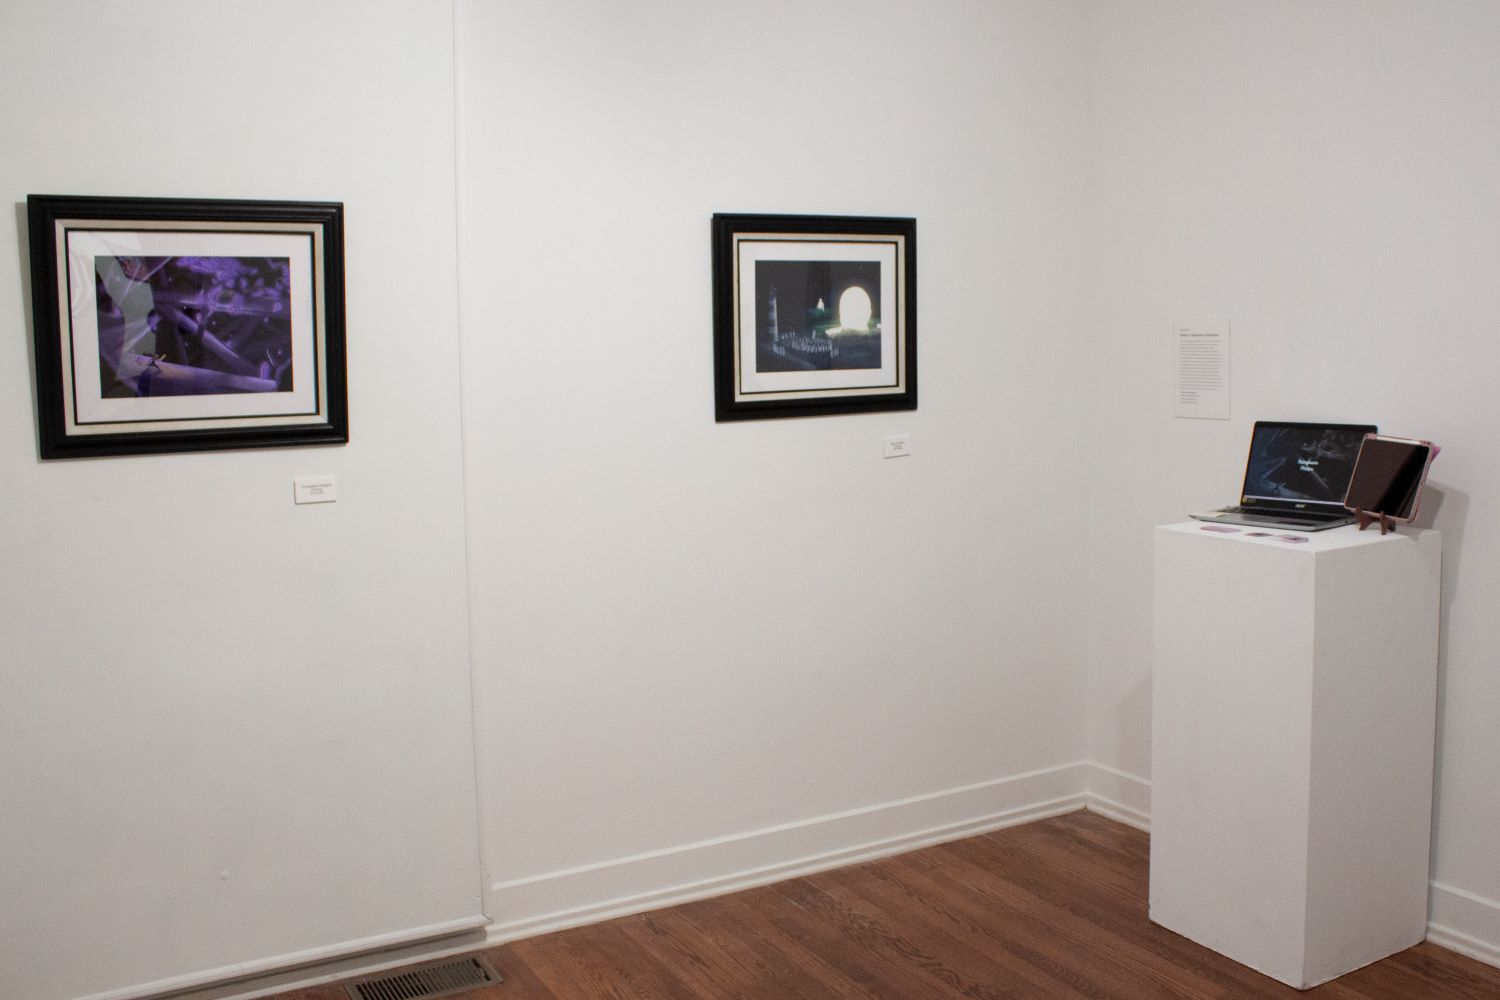 White gallery room with dragon picture, picture of glowing beings, and laptop and tablet on a pedastal